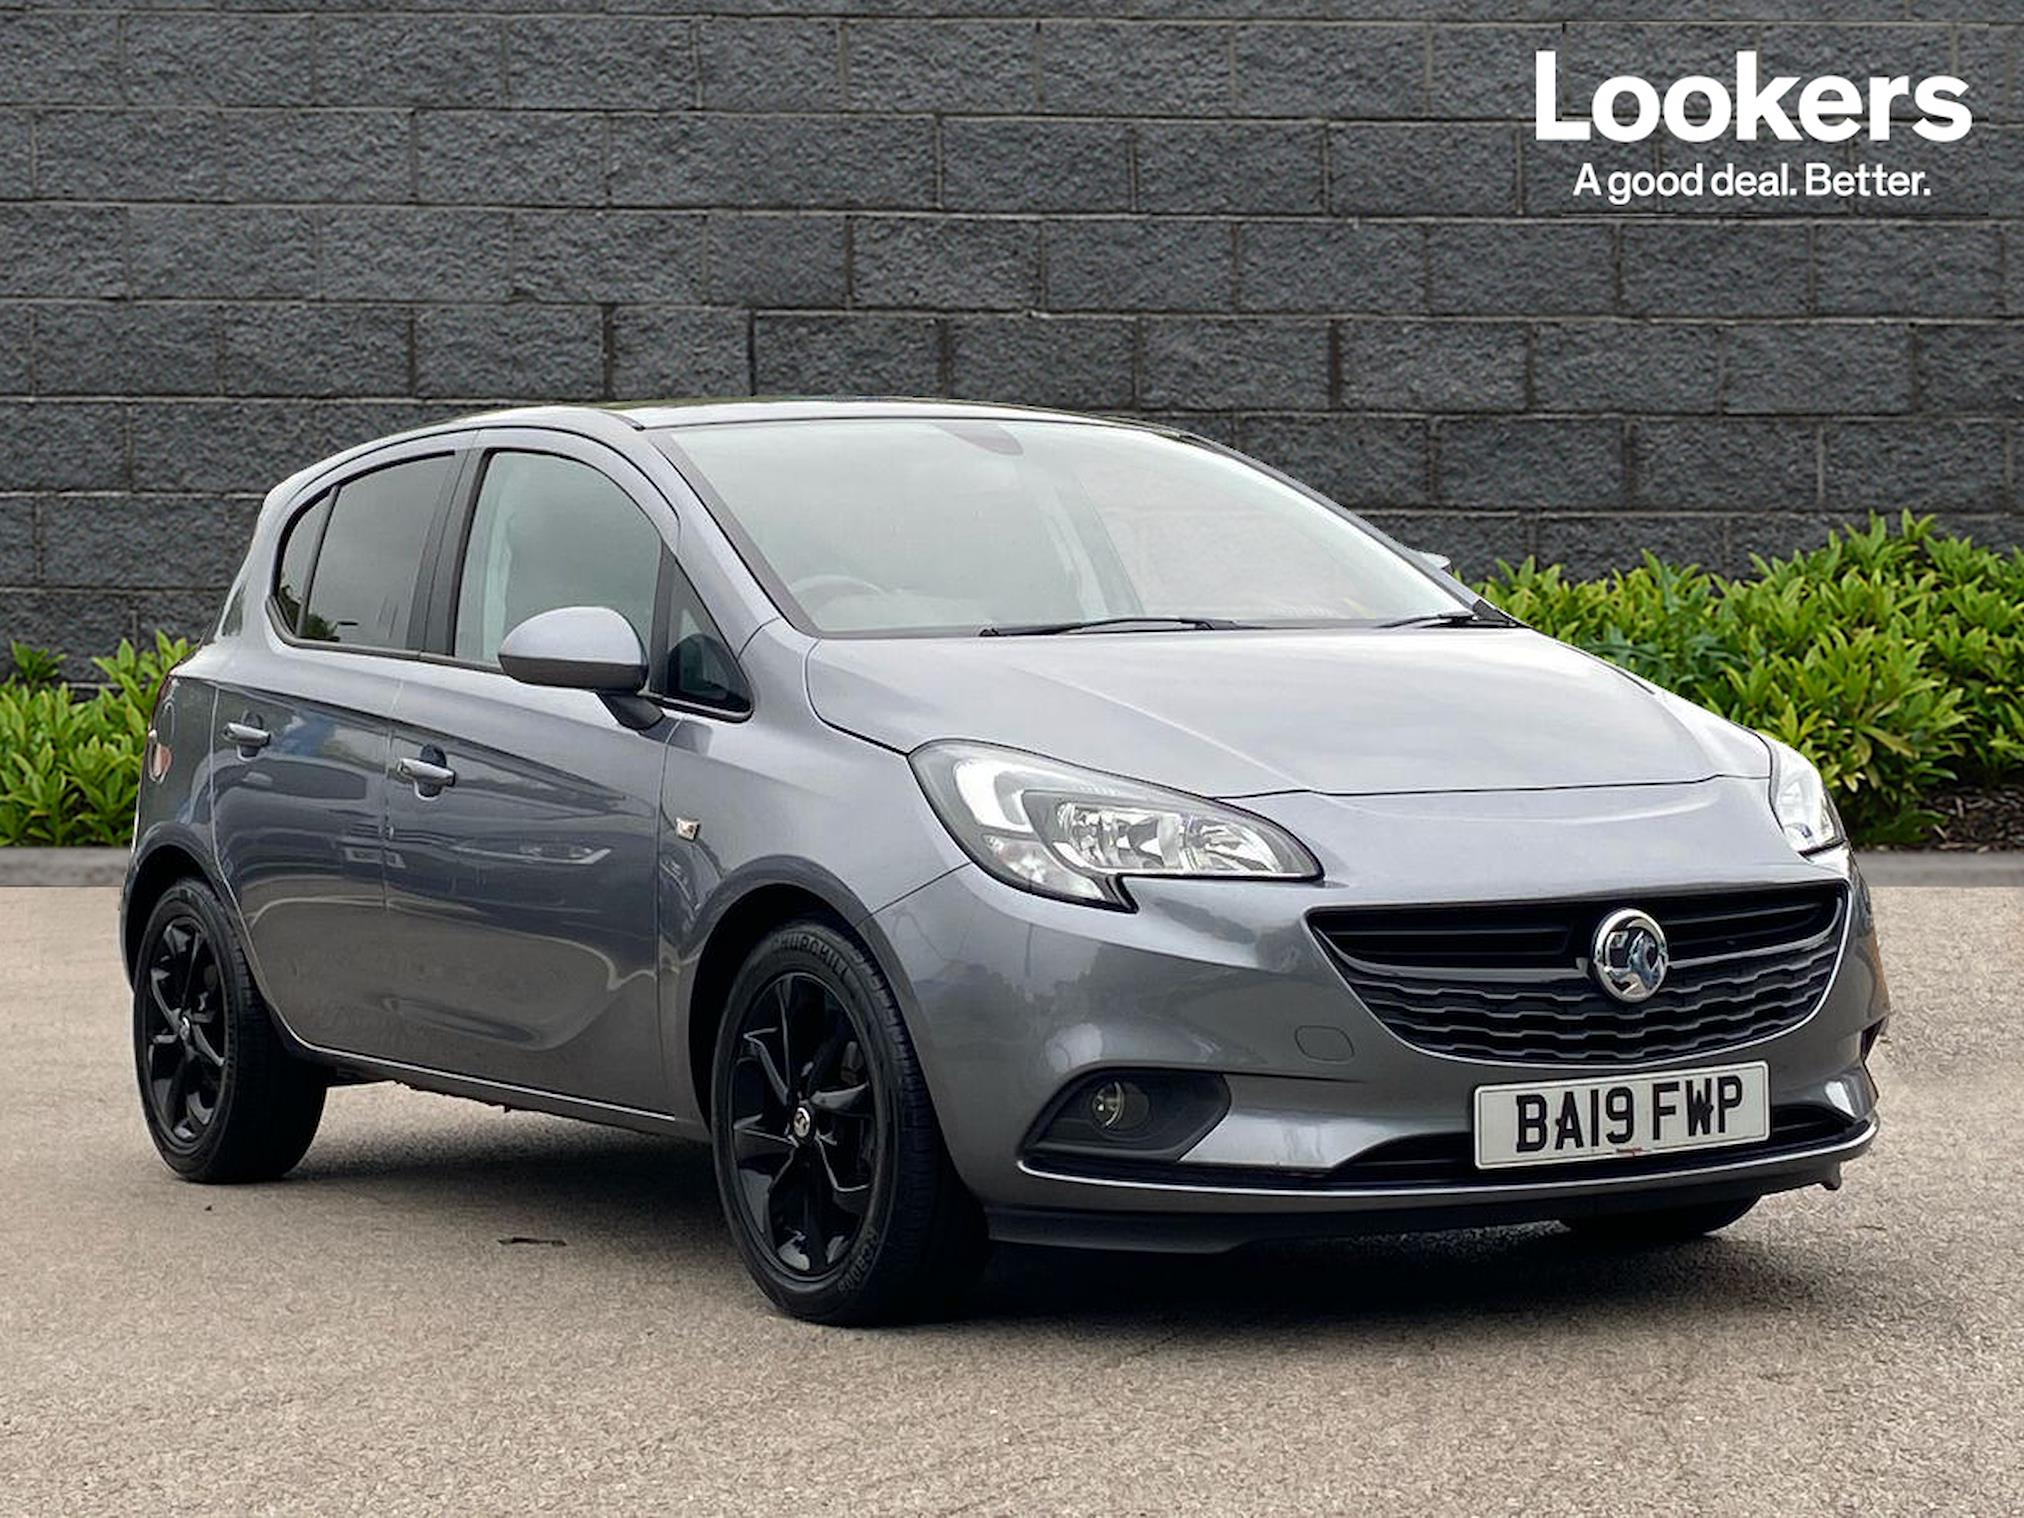 Used VAUXHALL CORSA 1.4 Griffin 5Dr 2019